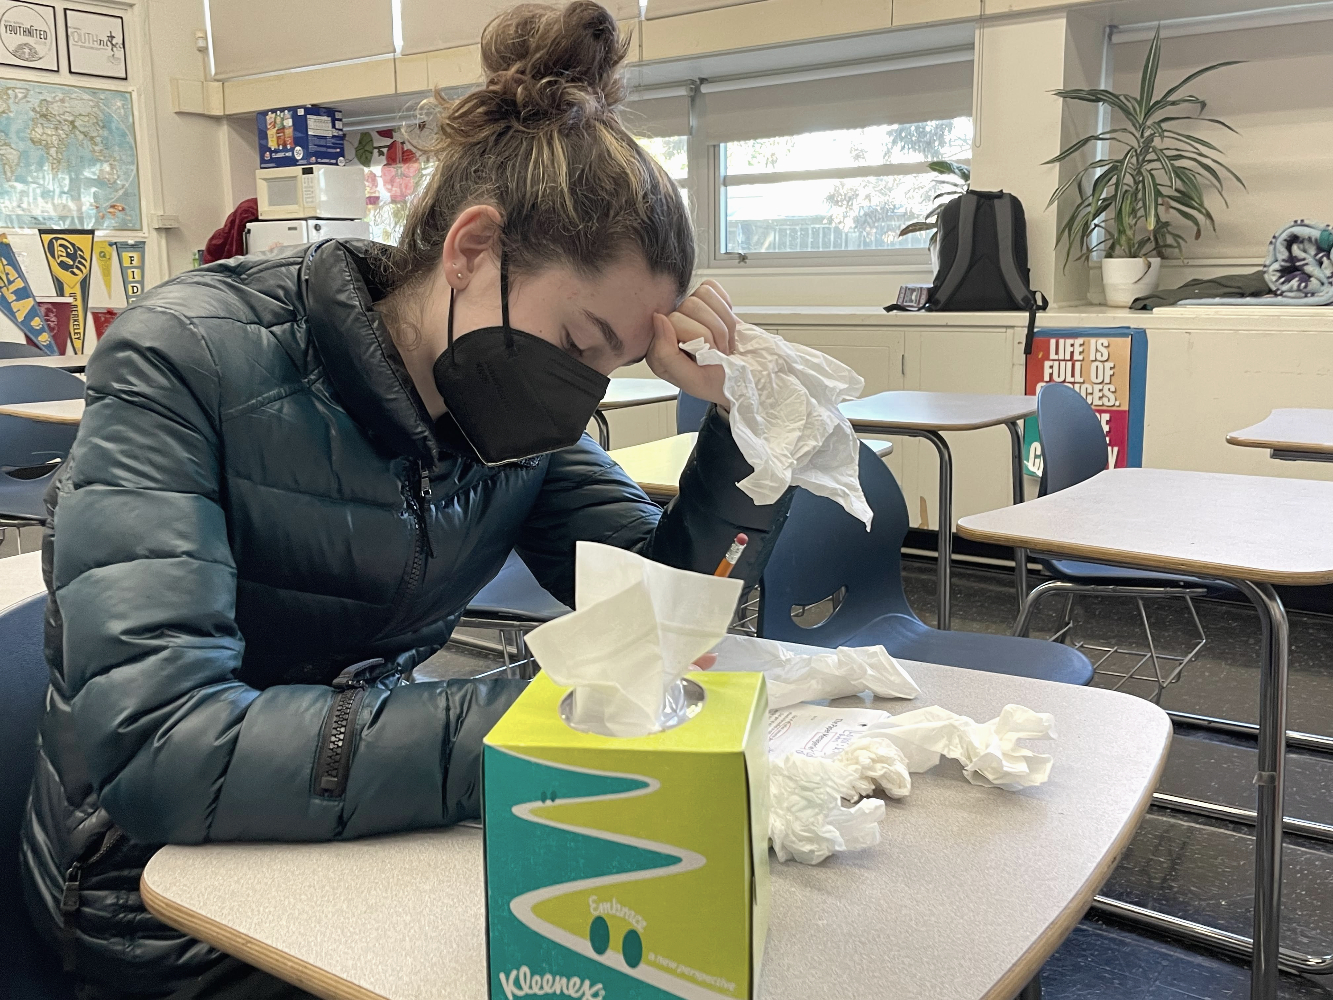 Students report more academic stress during flu season because they find it difficult to catch up after missing class. “That is why many of the kids come to school sick, spreading the germs; they are told, ‘I won’t allow any late work,’ or ‘I will not let you make up a test,’” said Leonor Perez Zarco, Carlmont’s attendance clerk. 